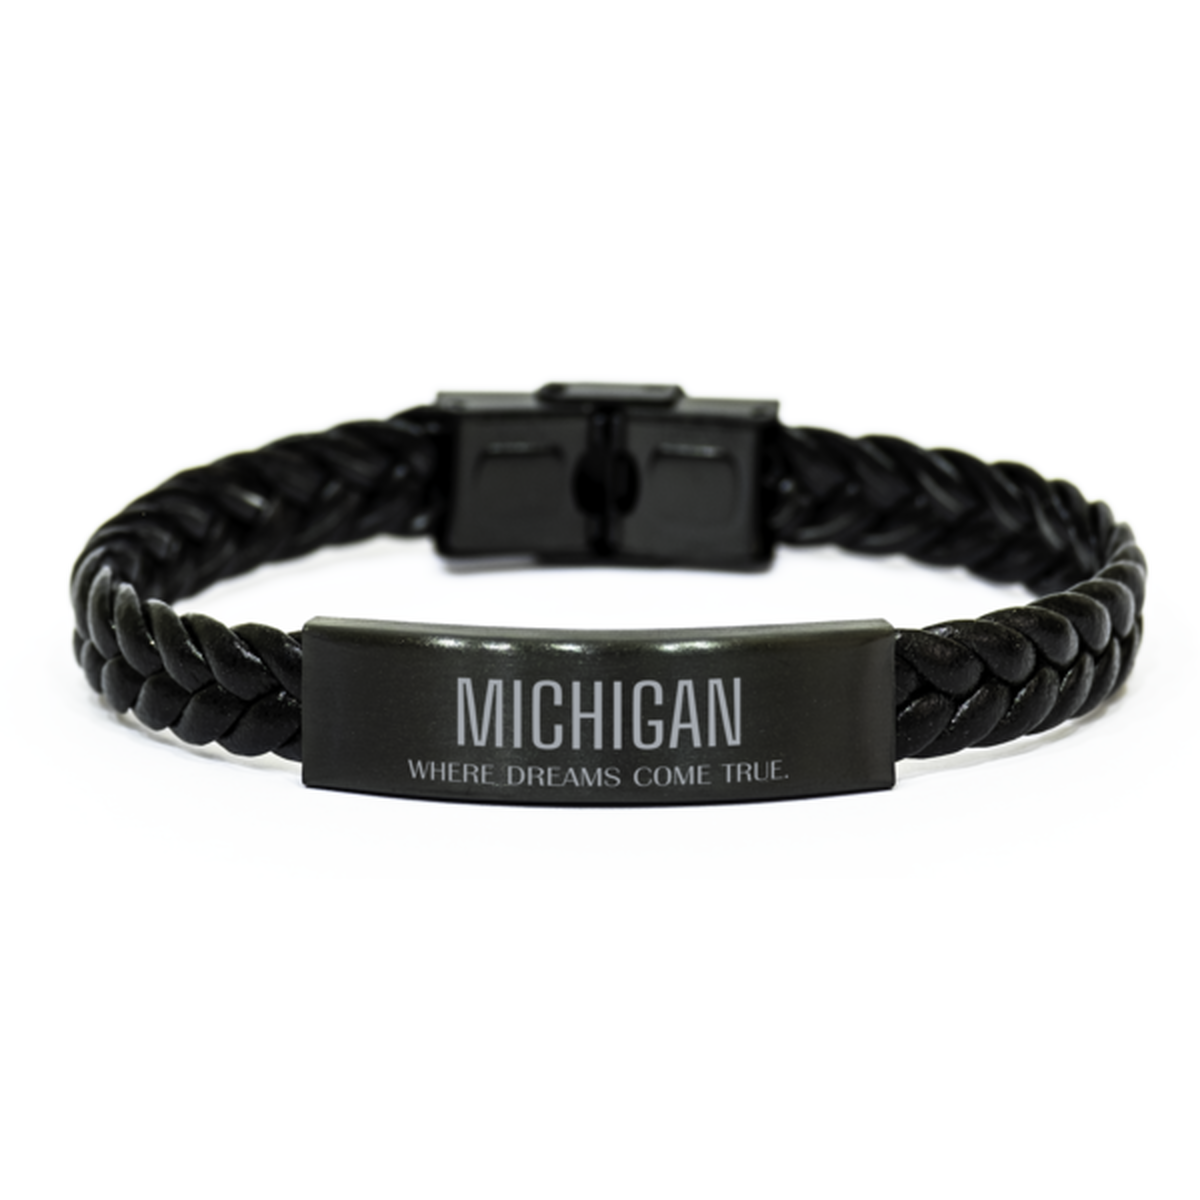 Love Michigan State Braided Leather Bracelet, Michigan Where dreams come true, Birthday Inspirational Gifts For Michigan Men, Women, Friends